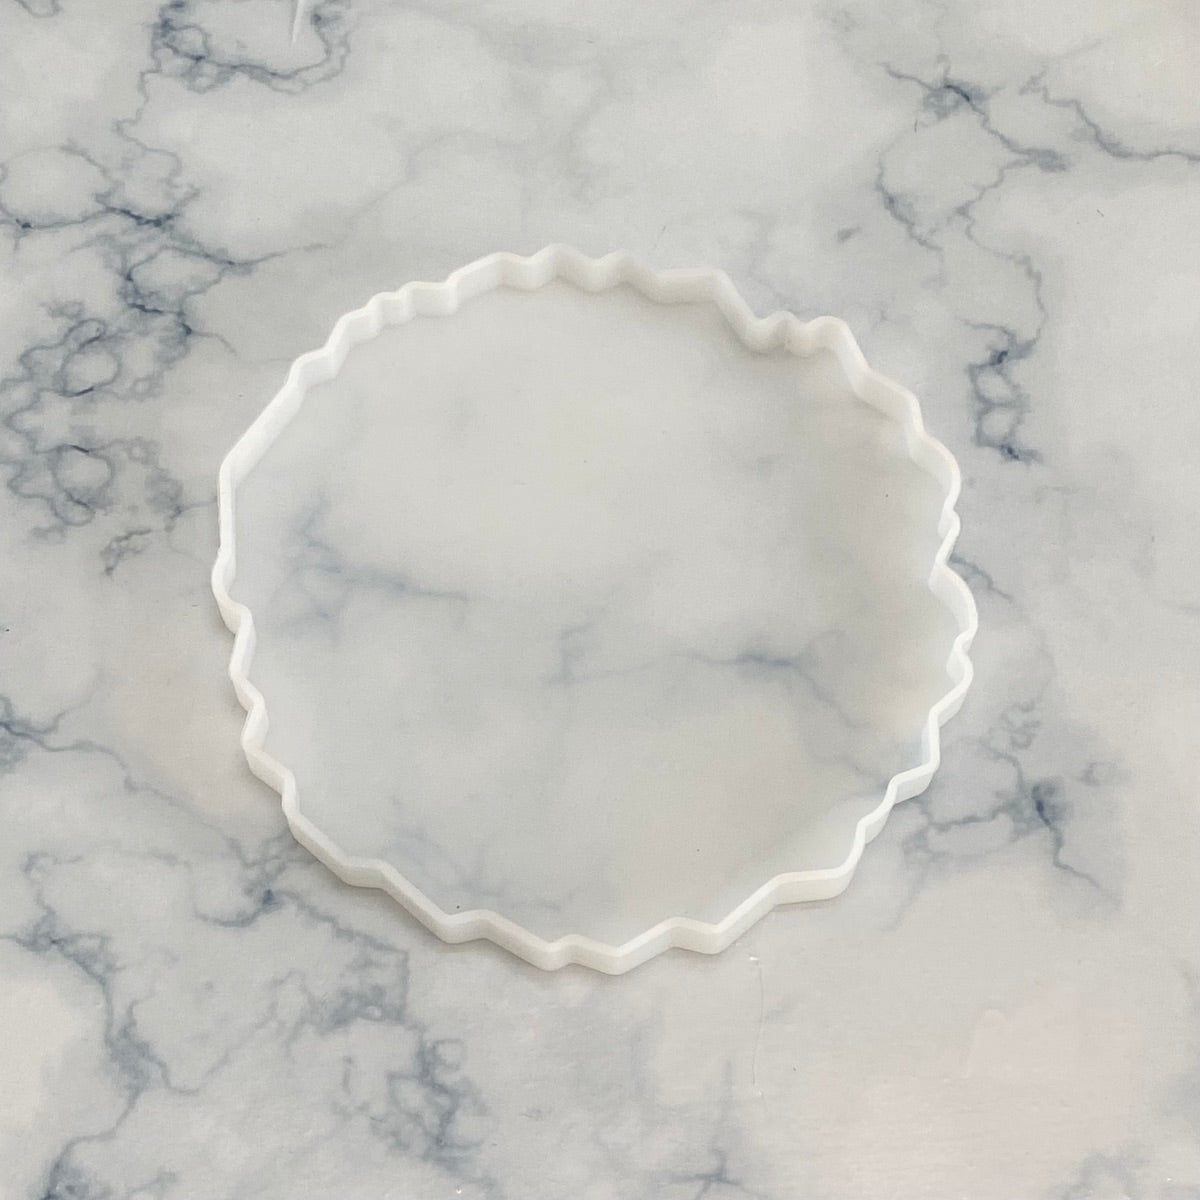 6 Inch agate coaster mould